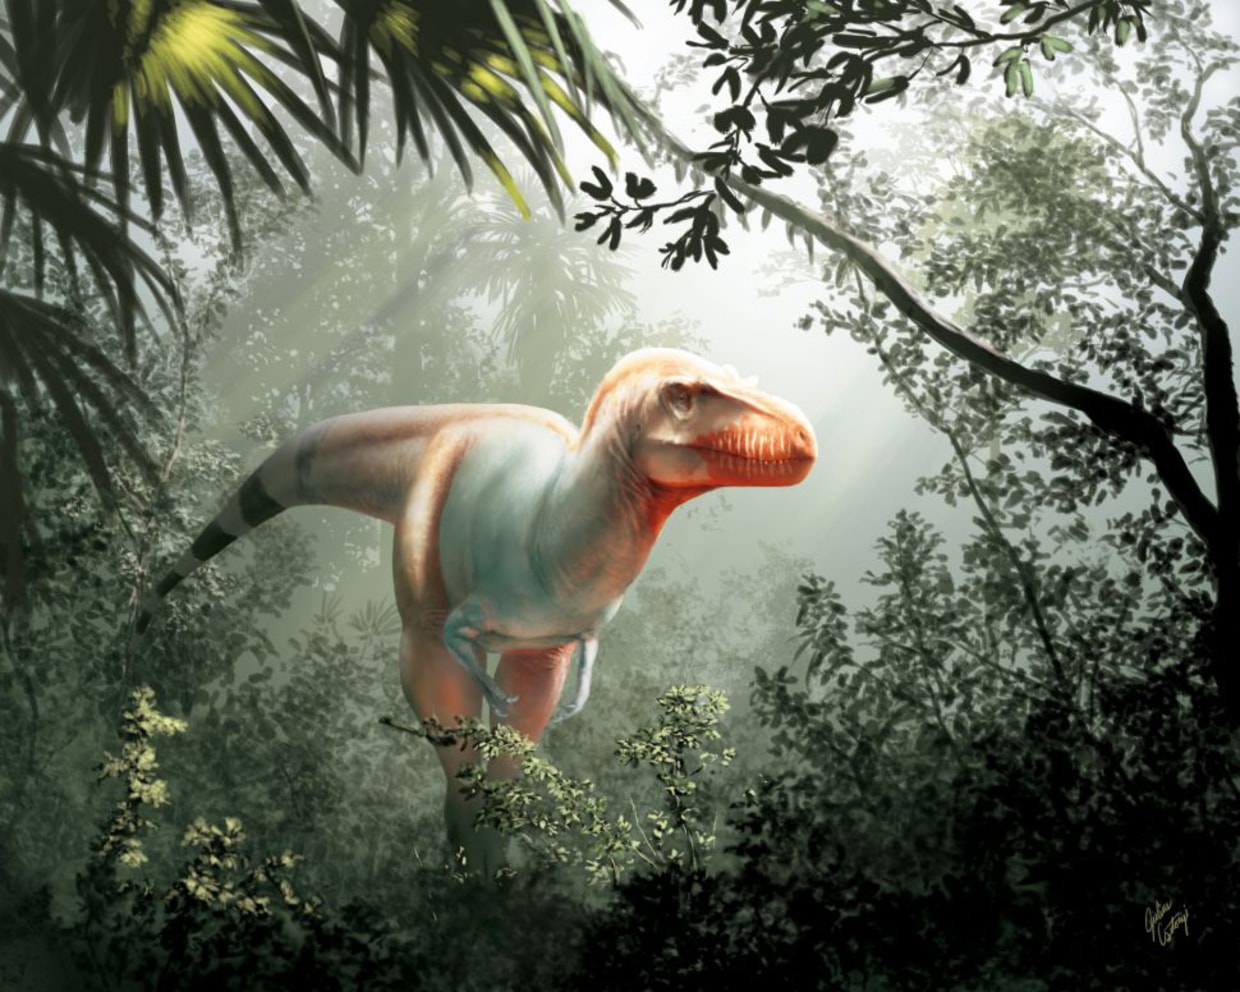 Teen Dinosaurs: T. Rex's Awkward Phase Helped It Hunt - The Atlantic